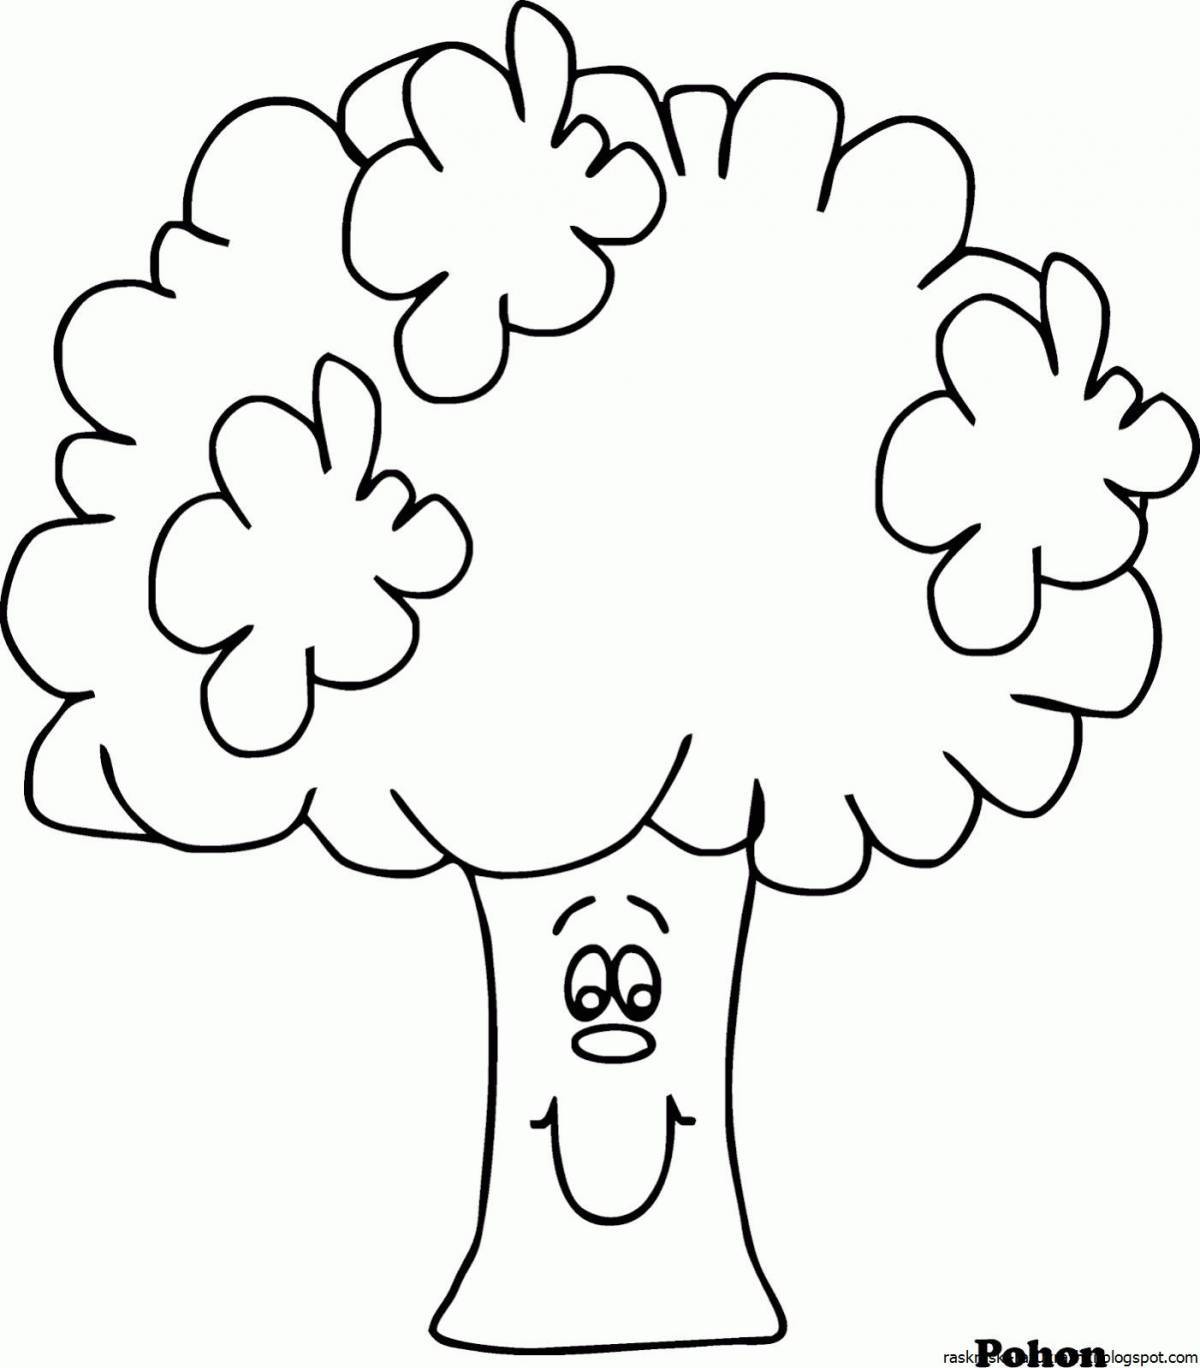 Living tree coloring for kids